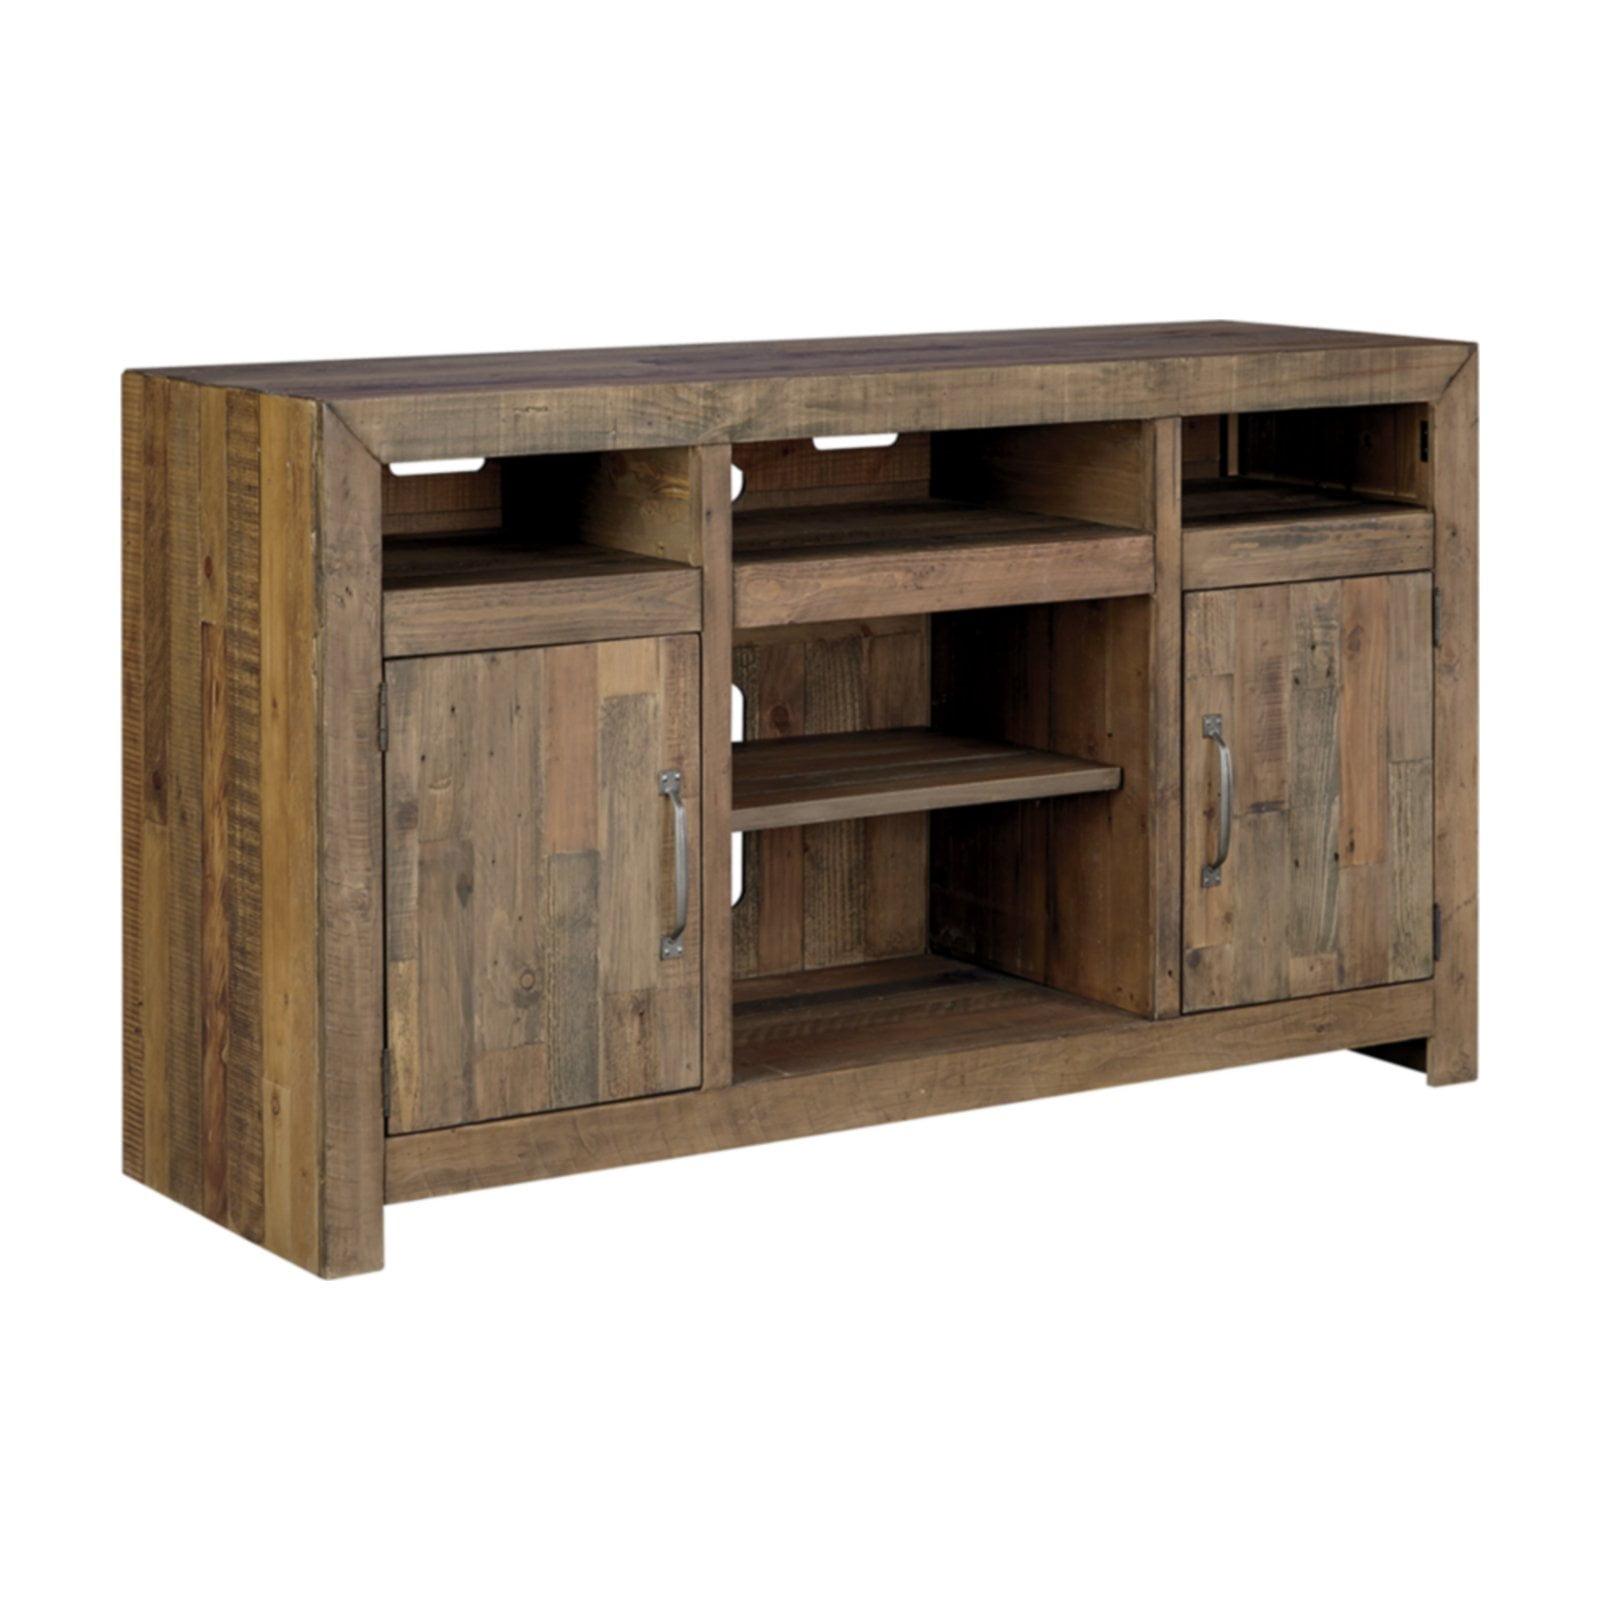 Rustic Sommerford 62" Brown TV Stand with Fireplace Option